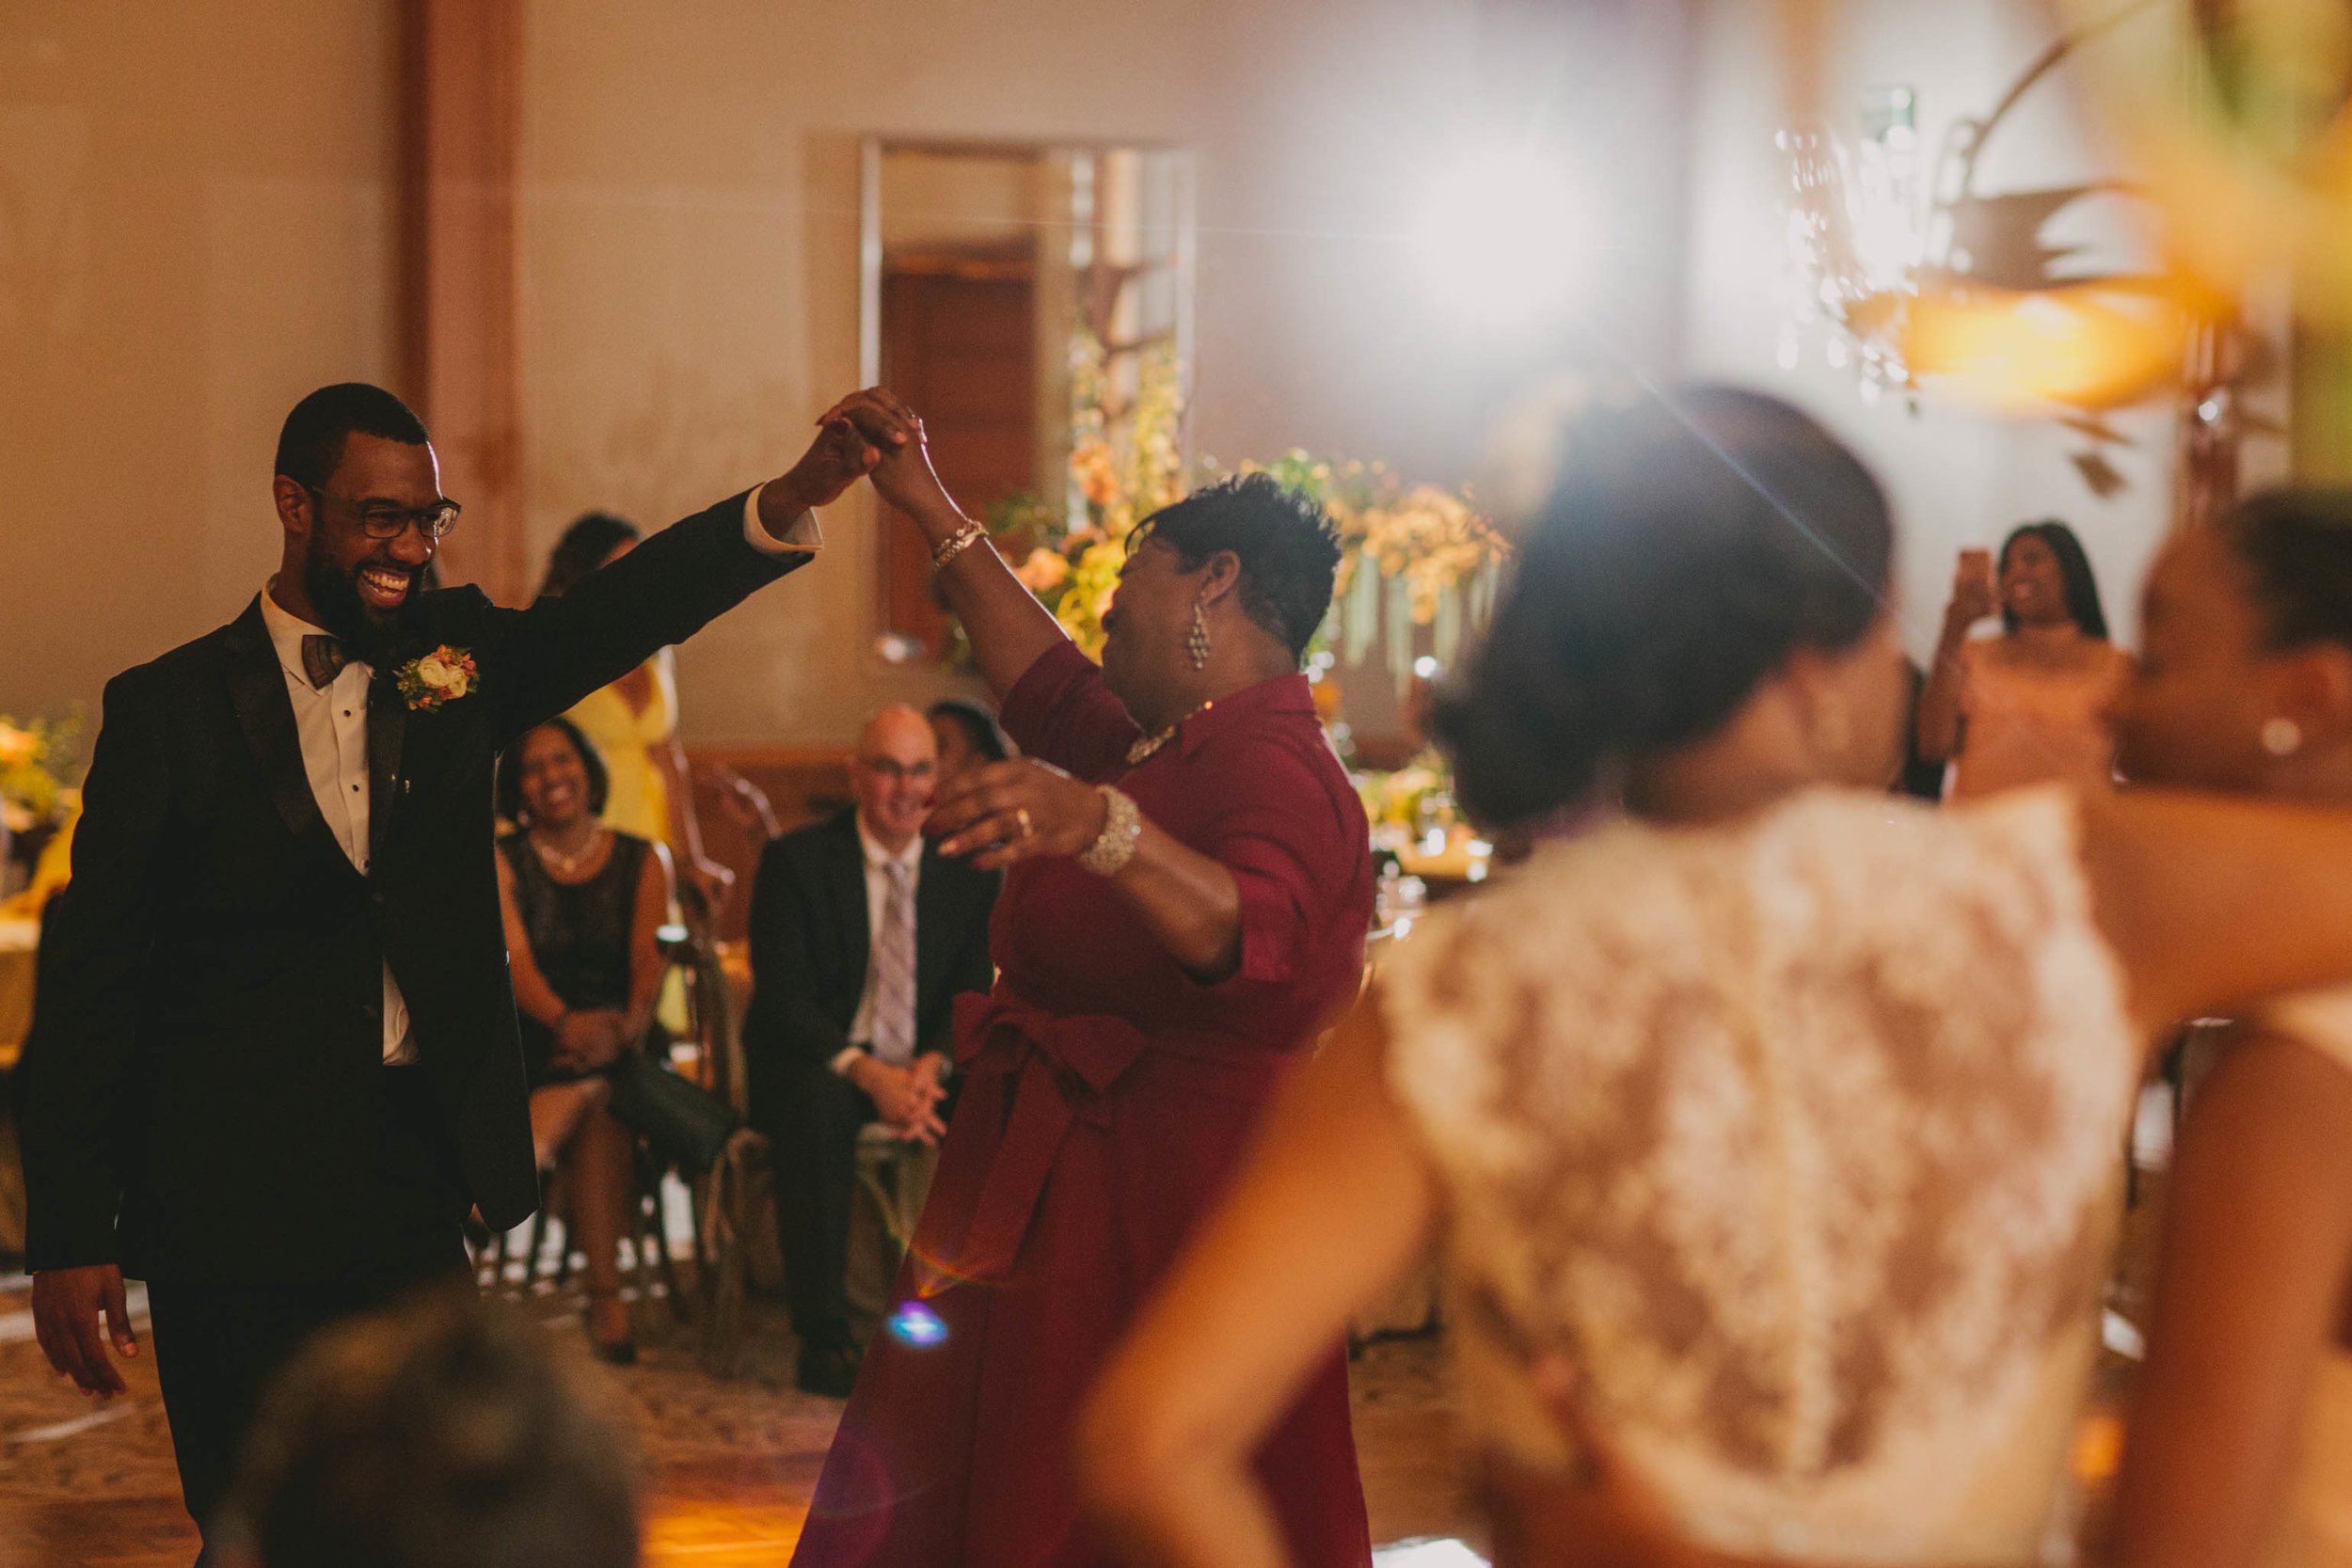 The groom and his mother dance the night away at this elegant Umstead Hotel and Spa wedding